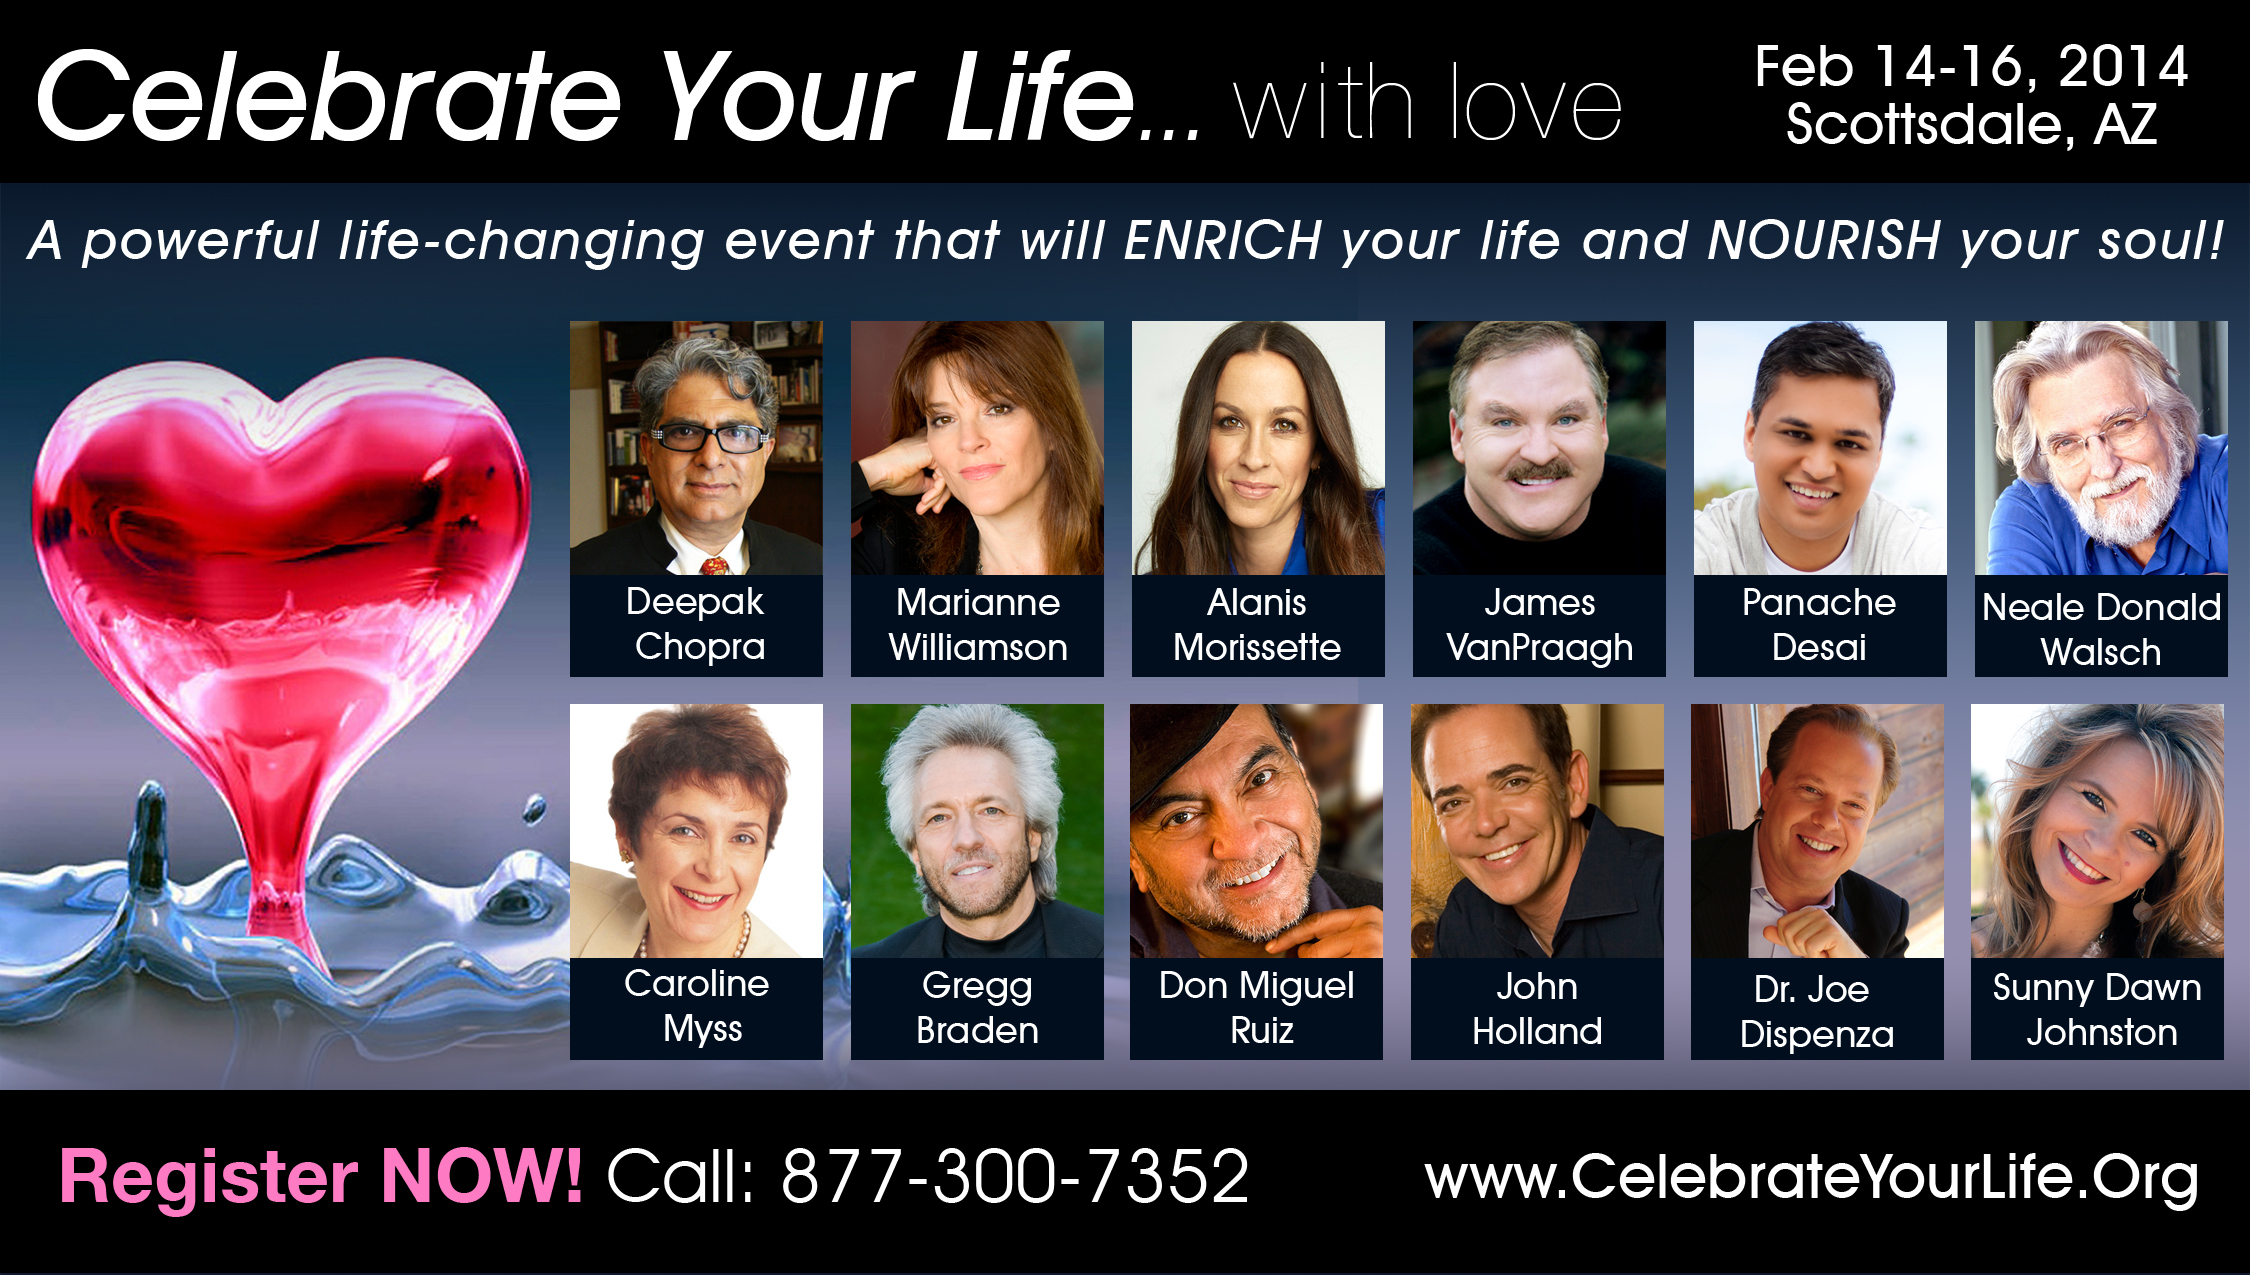 Alanis Morissette Joins Spiritual Visionaries at Celebrate Your Life Conference Feb. 14-16, 2014